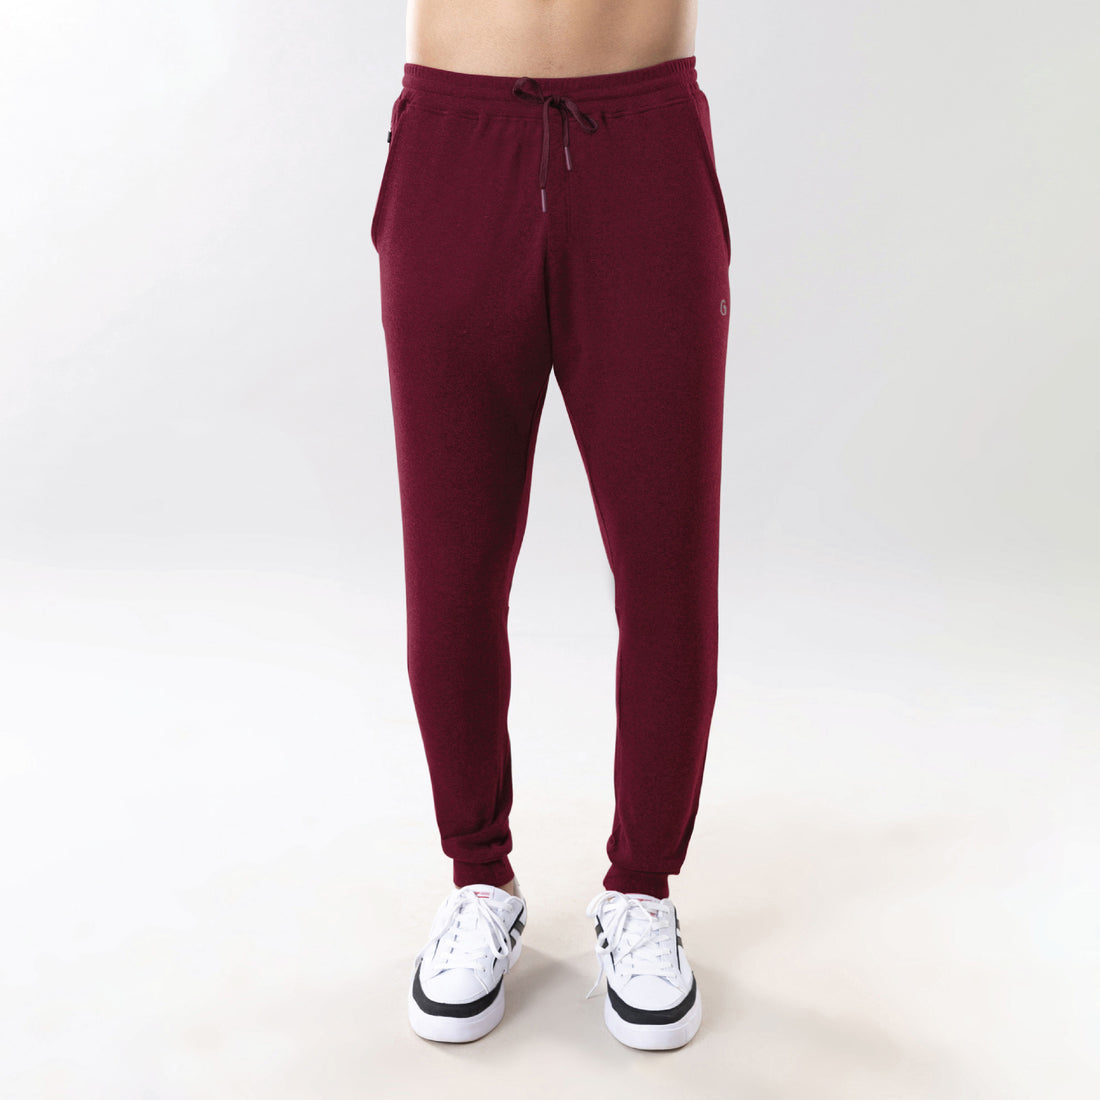 How Should Joggers Fit You & When Should You Wear Them?